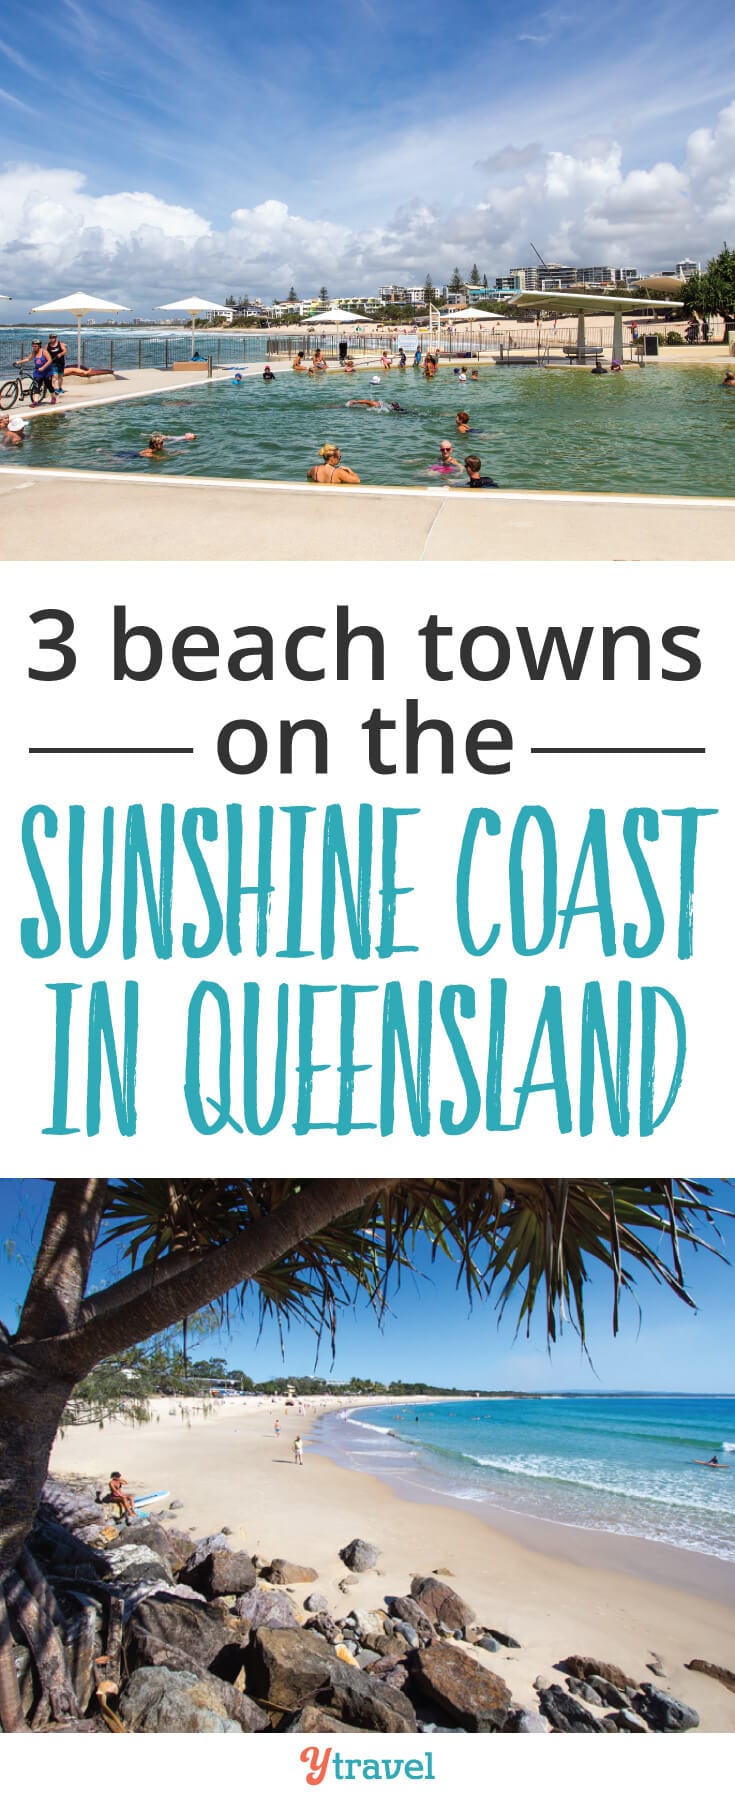 We are sharing 3 beach towns on the Sunshine Coast in Queensland that we absolutely love!